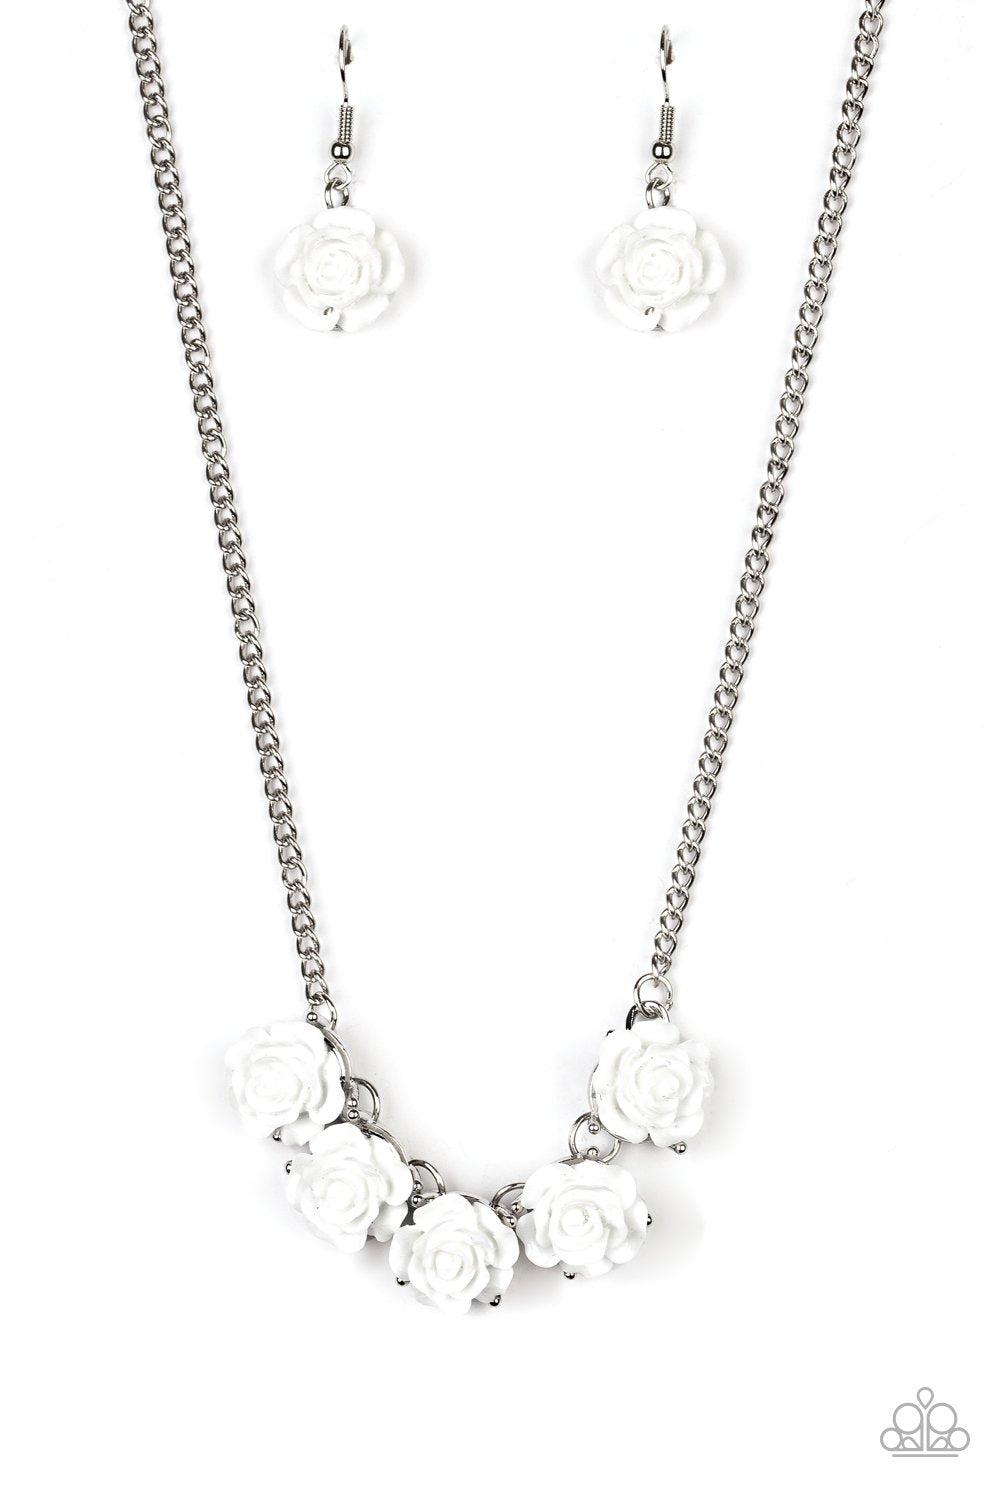 Garden Party Posh White Rose Flower Necklace - Paparazzi Accessories- lightbox - CarasShop.com - $5 Jewelry by Cara Jewels